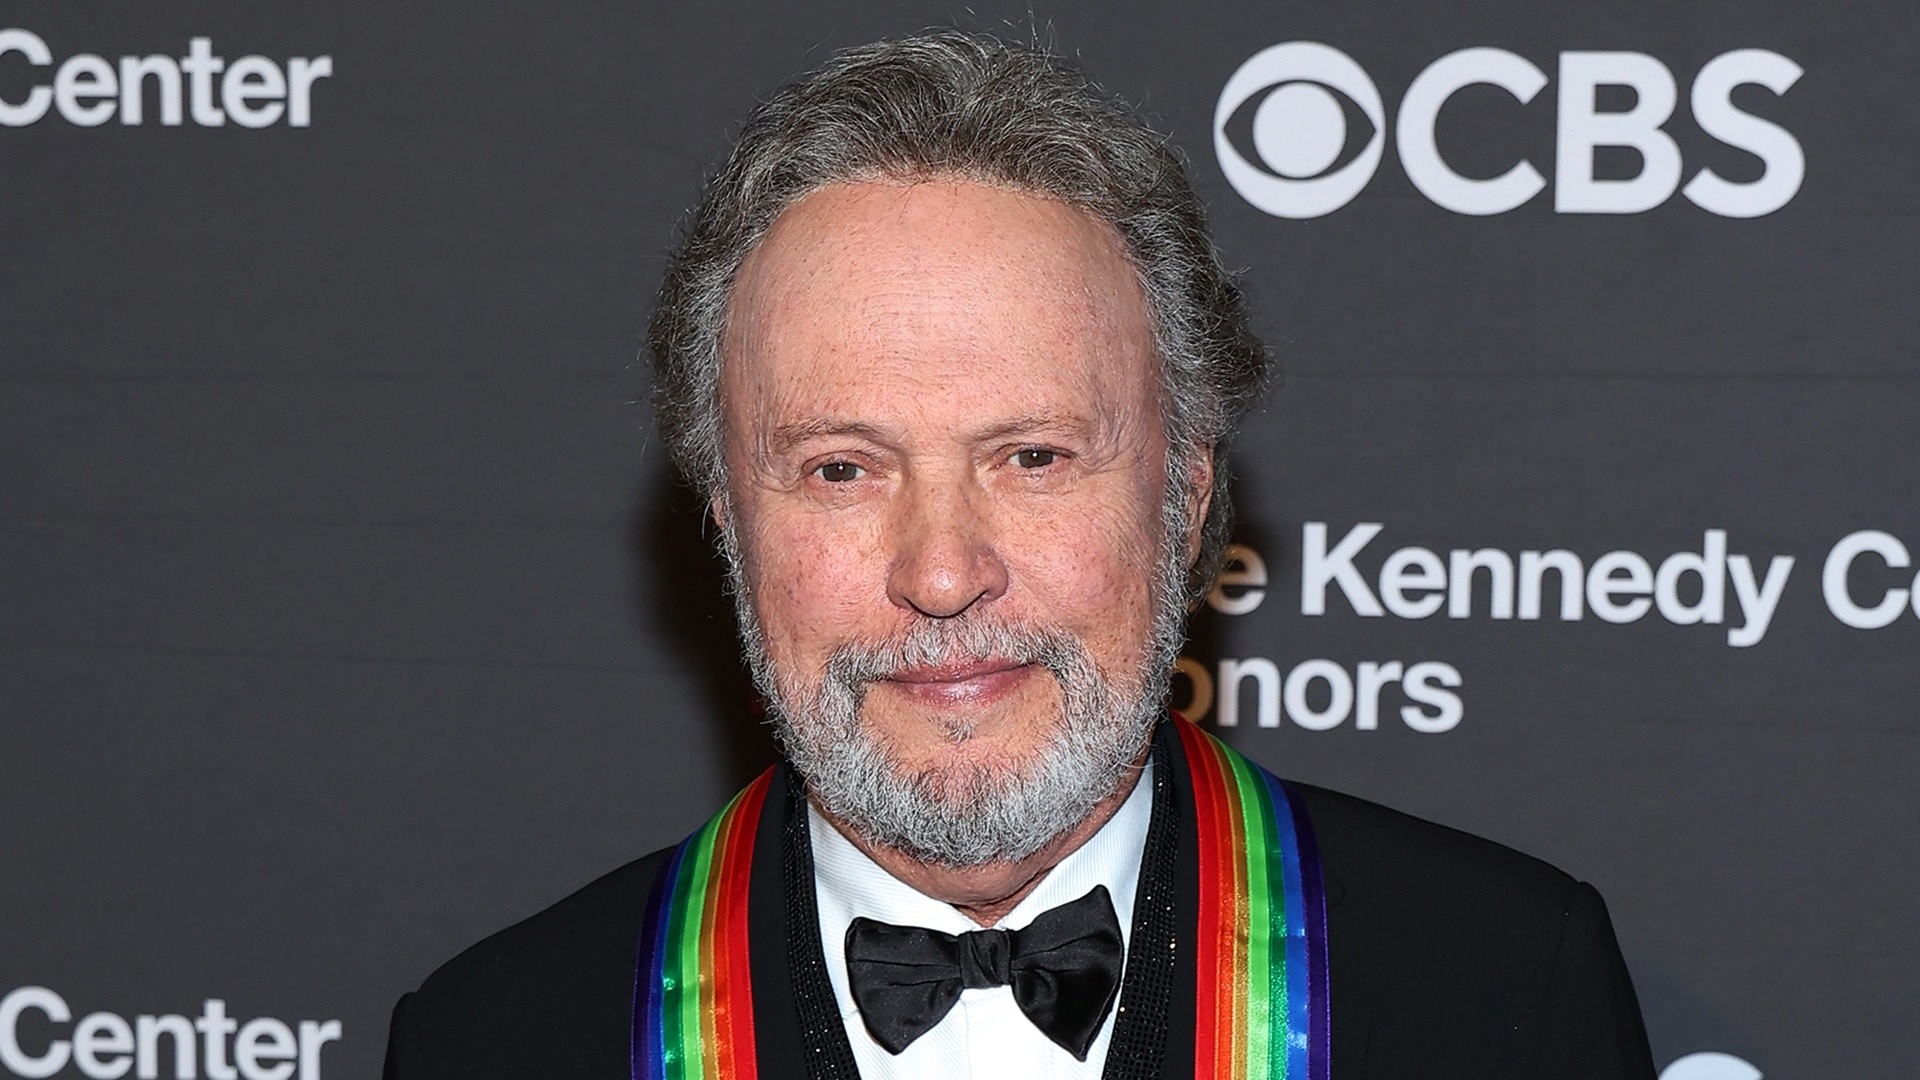 Stars pay tribute to Billy Crystal during Kennedy Center Honors